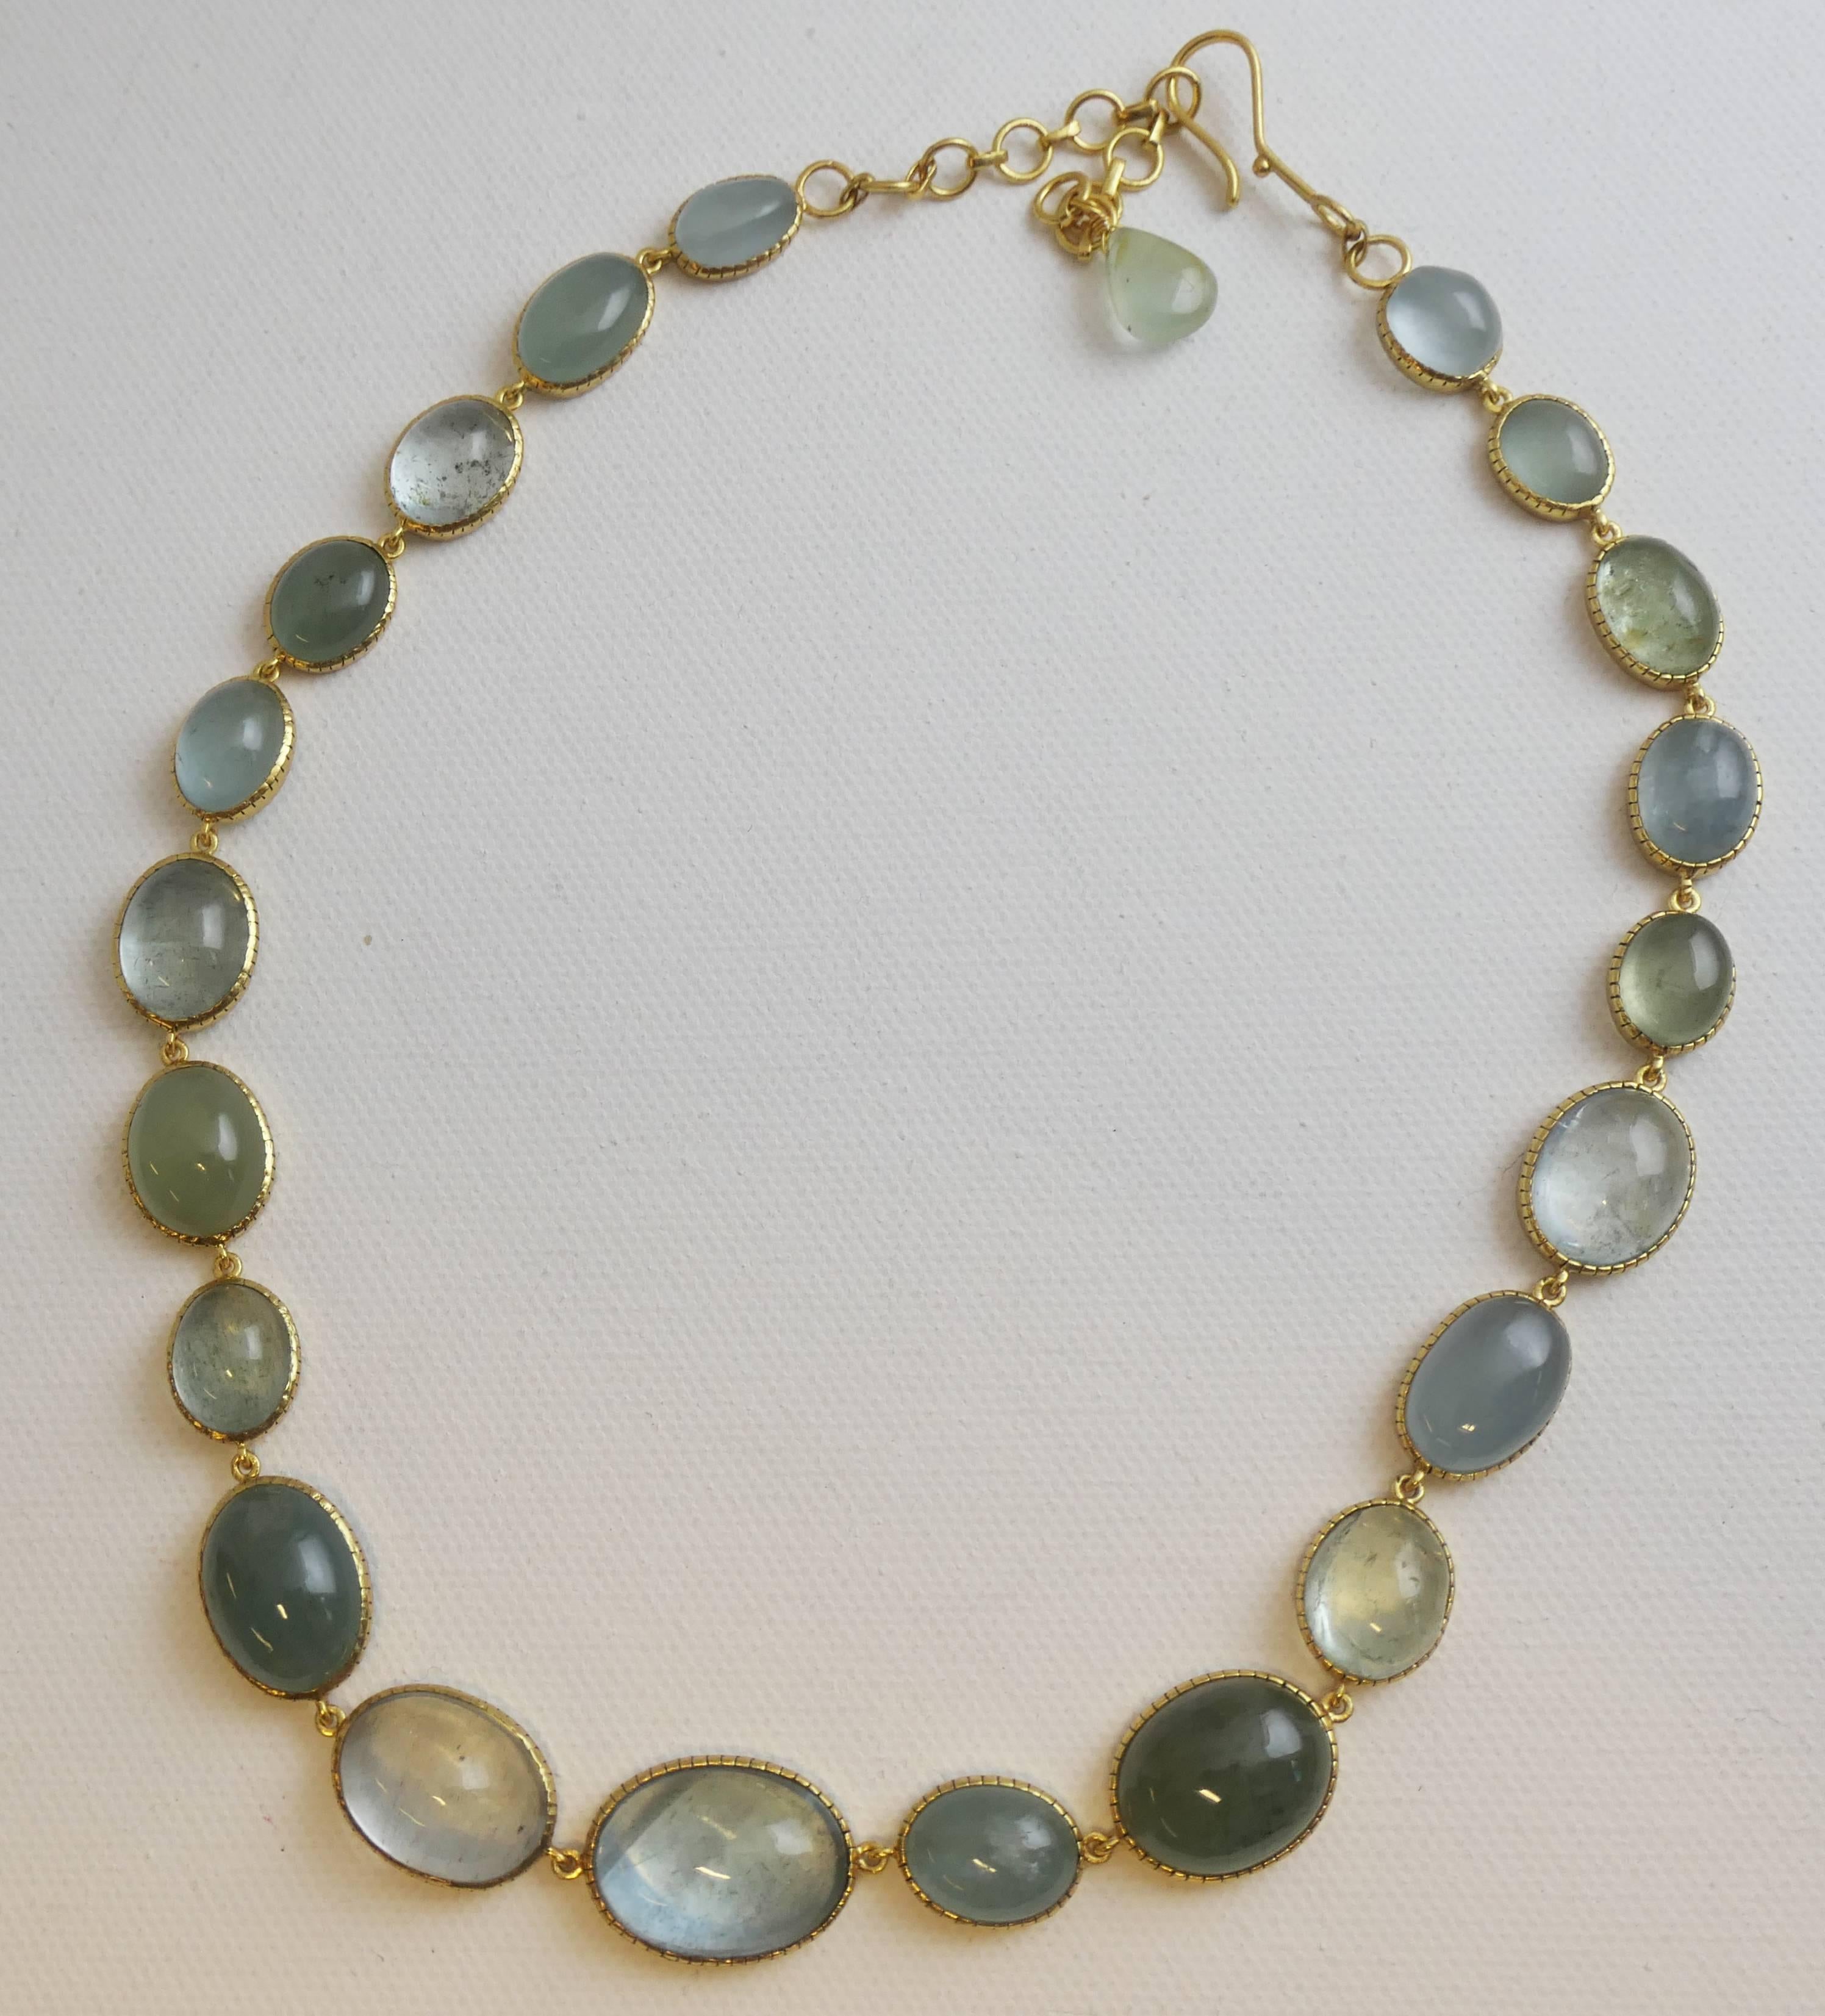 This single strand aquamarine necklace is 17 inches long with an additional 3 inch of extension chain and it has a hook clasp. The cabochon aquamarine are of varying shapes and sizes, ranging from 10 to 20 mm in diameter.